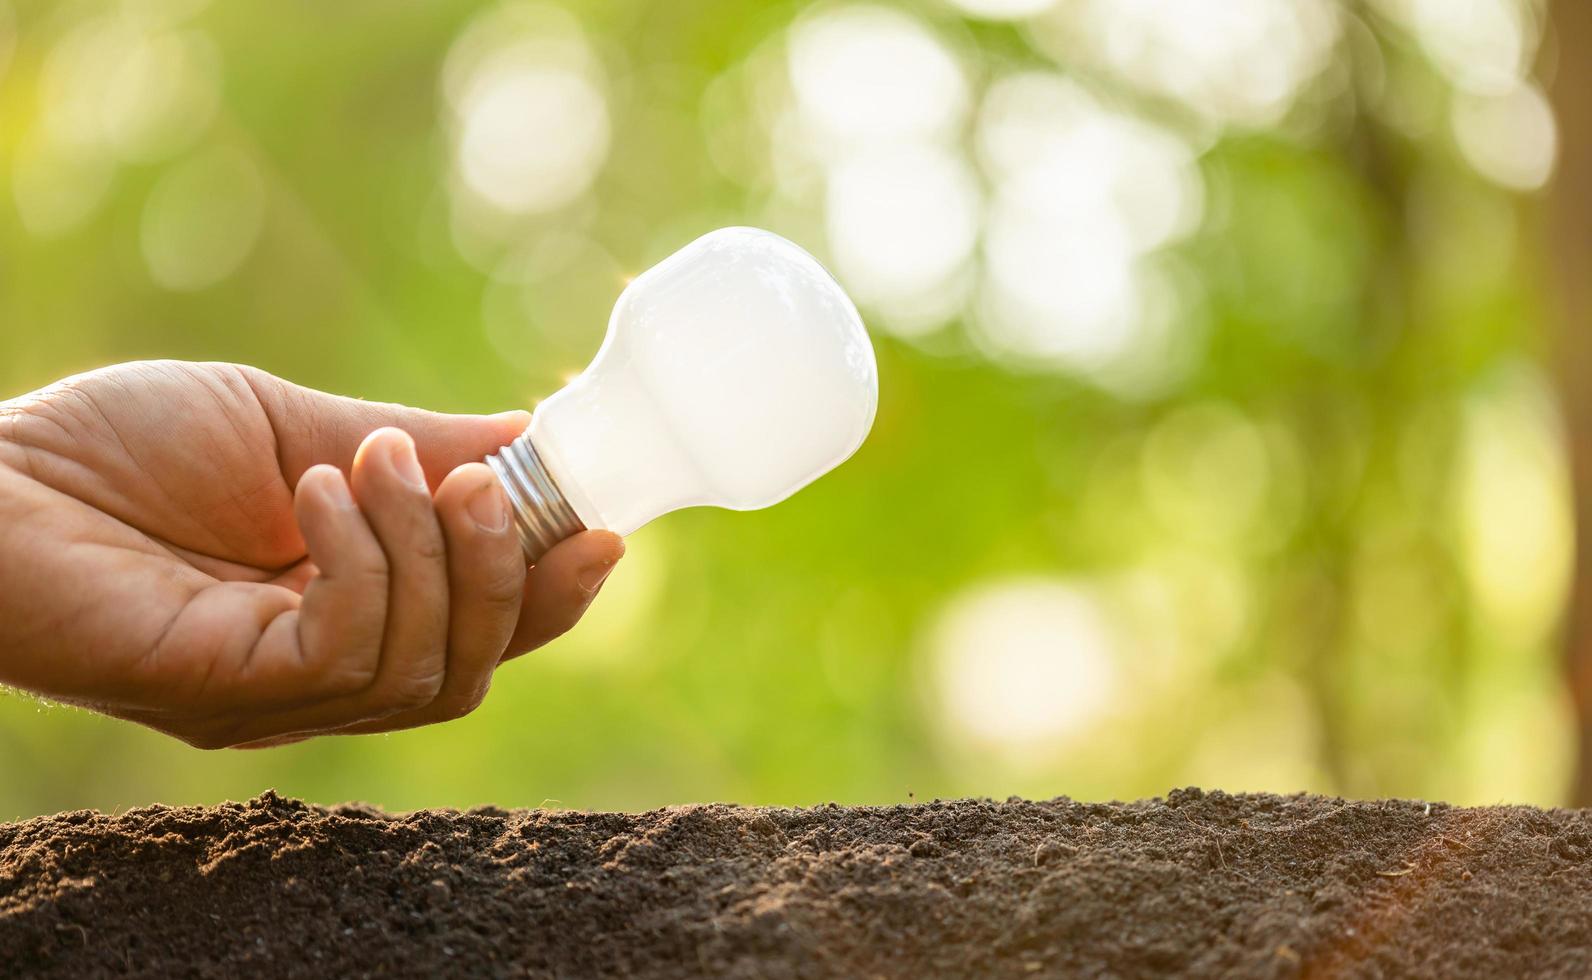 Growth or Saving Energy concept. People planting white light bulb in soil on green garden or nature blur photo